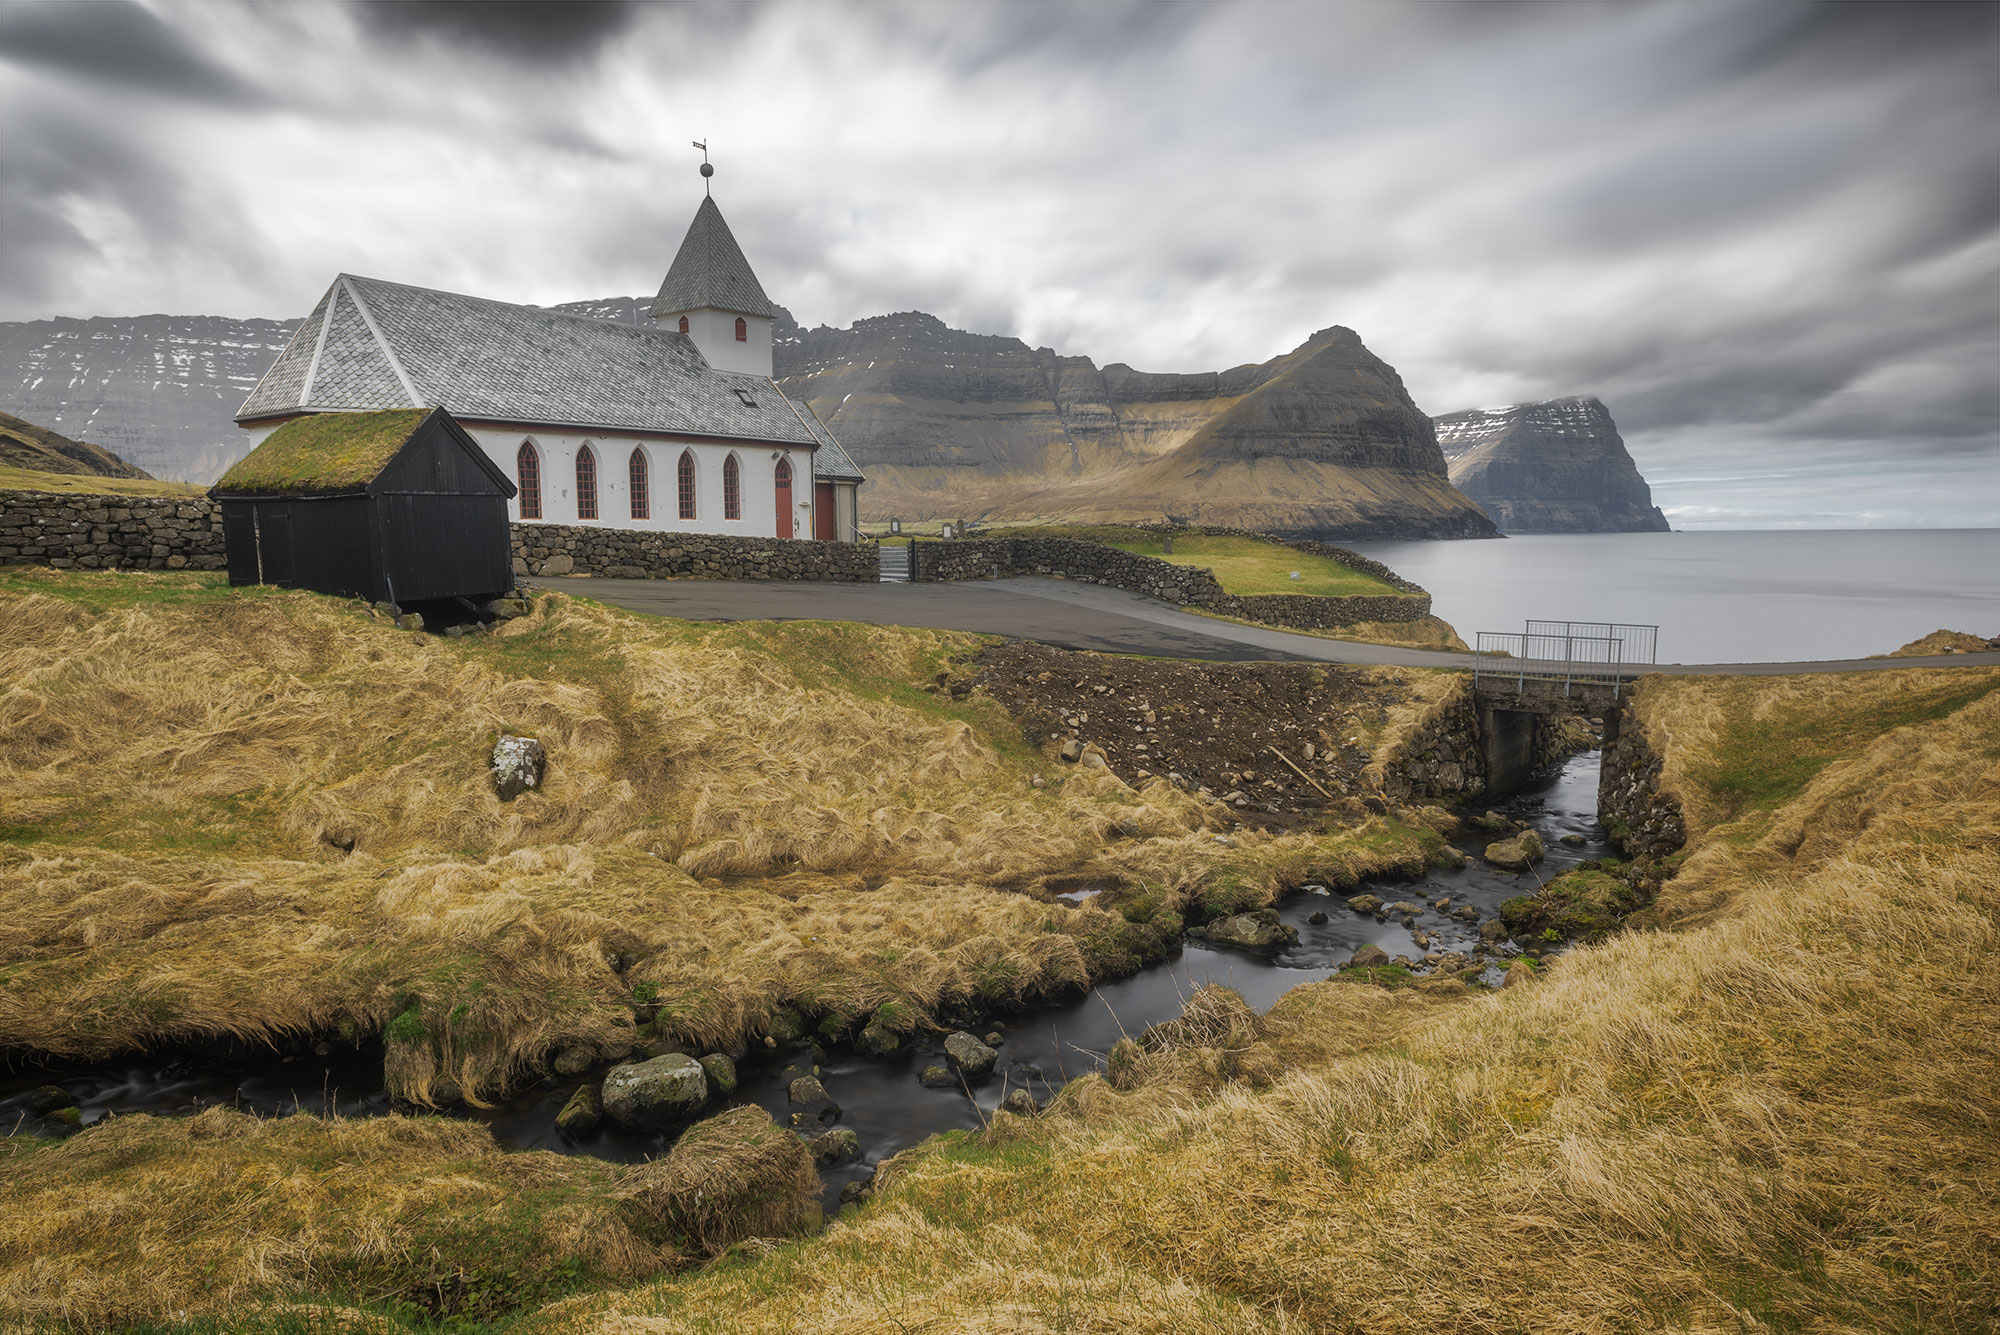 Experience the captivating beauty of the Viðareiði Church on the remote island of Viðoy in the Faroe Islands through the lens of long exposure landscape photography. This mesmerizing image captures the timeless charm of the church amidst the rugged island landscape, inviting viewers to immerse themselves in its serene ambiance. Explore the unique allure of the Faroe Islands captured in this evocative photograph, showcasing the artistry and skill of the photographer. Discover the breathtaking landscapes of the Faroe Islands in this stunning addition to the landscape photography portfolio.